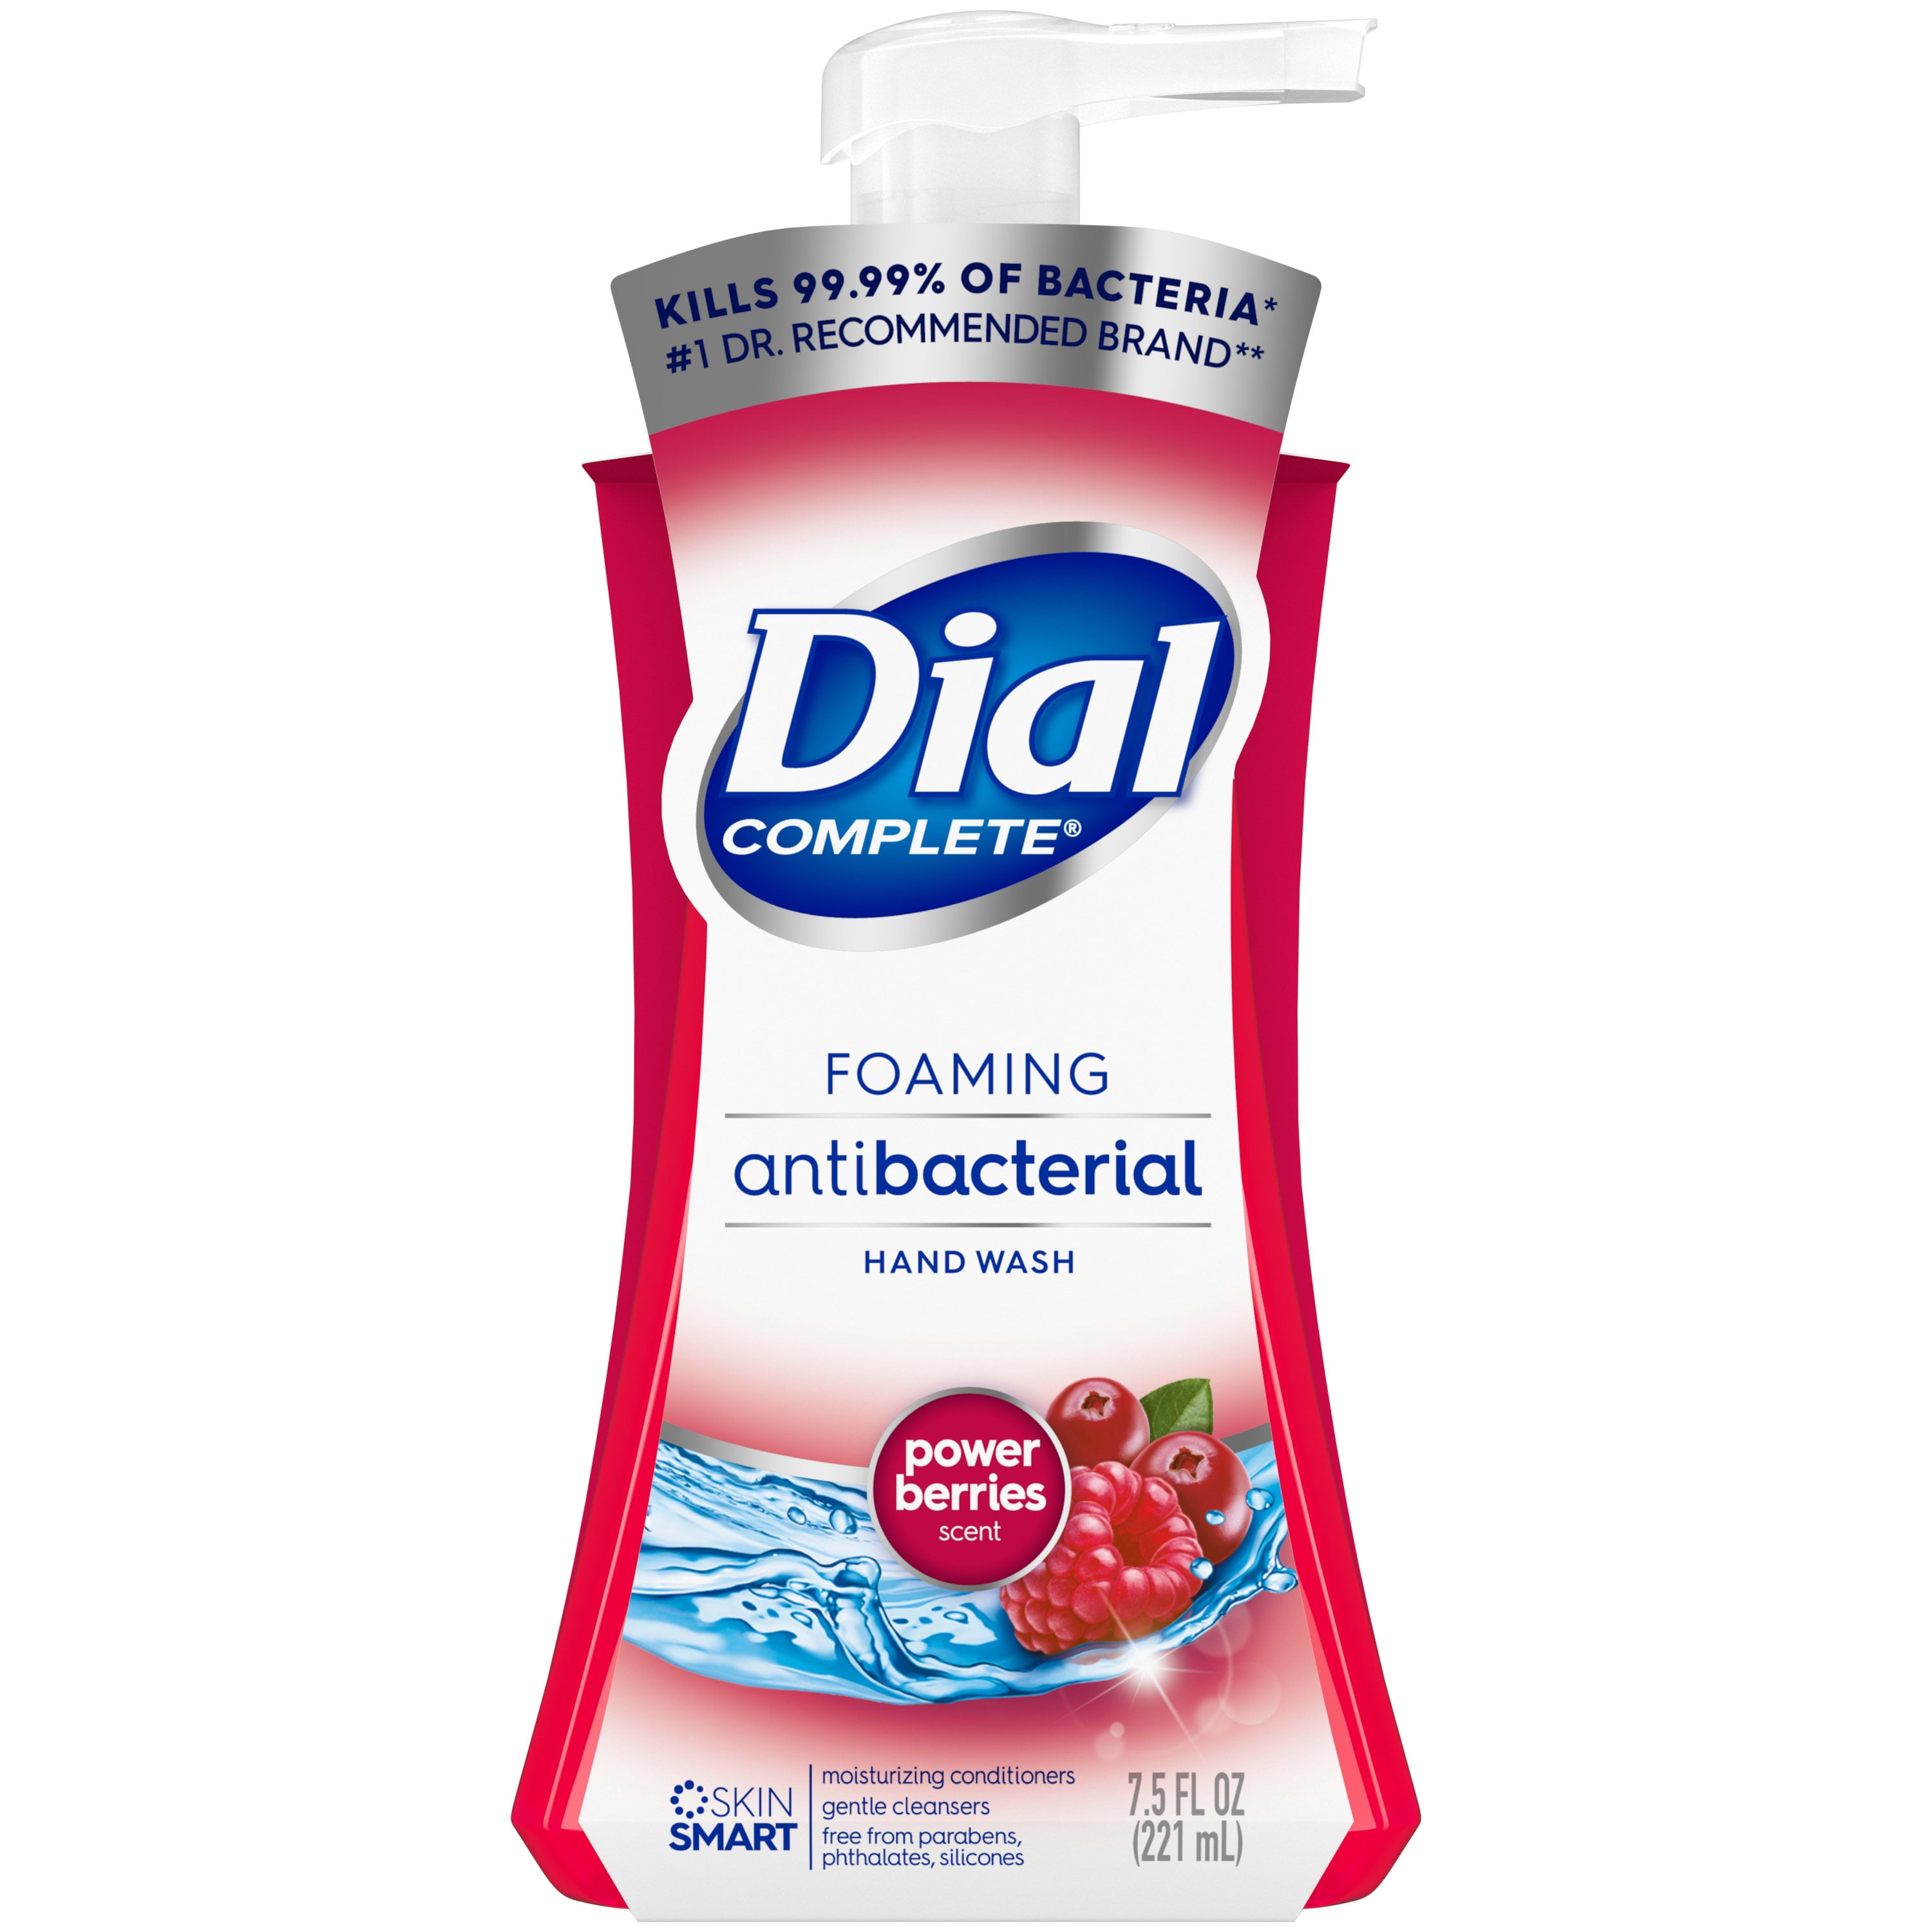 Dial FIT TF Refill Clean+ Foaming Hand Wash - 33.8 fl oz (1000 mL) -  Bacteria Remover, Odor Remover - Skin, Hand - Antibacterial -  Fragrance-free, Dye-free - 3 / Carton - Bluebird Office Supplies